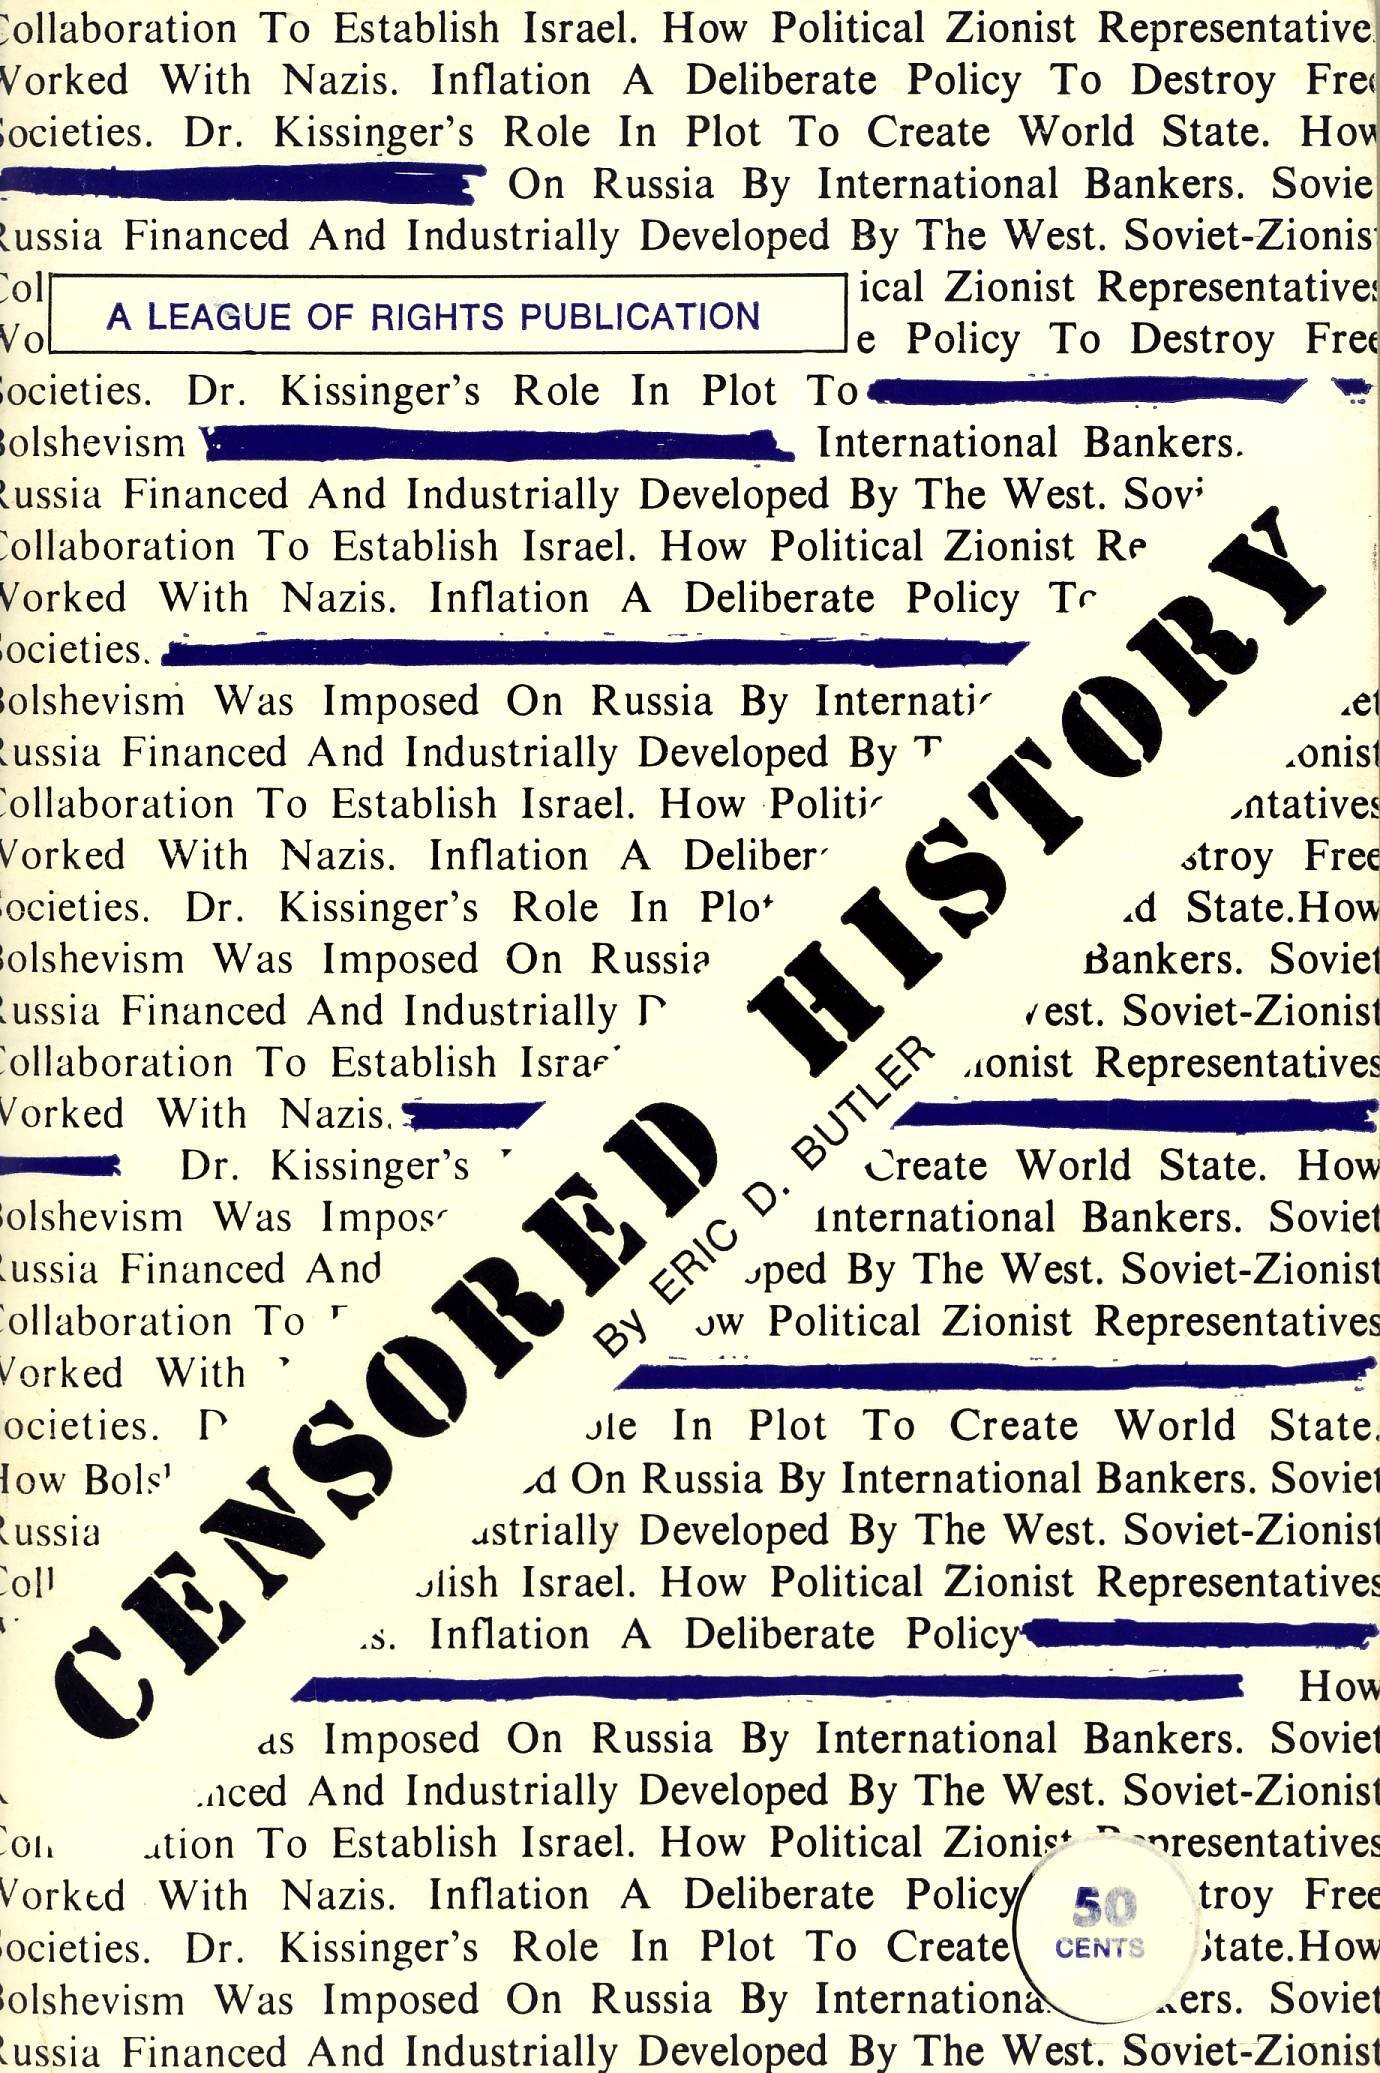 Censored History (1993) by Eric D Butler